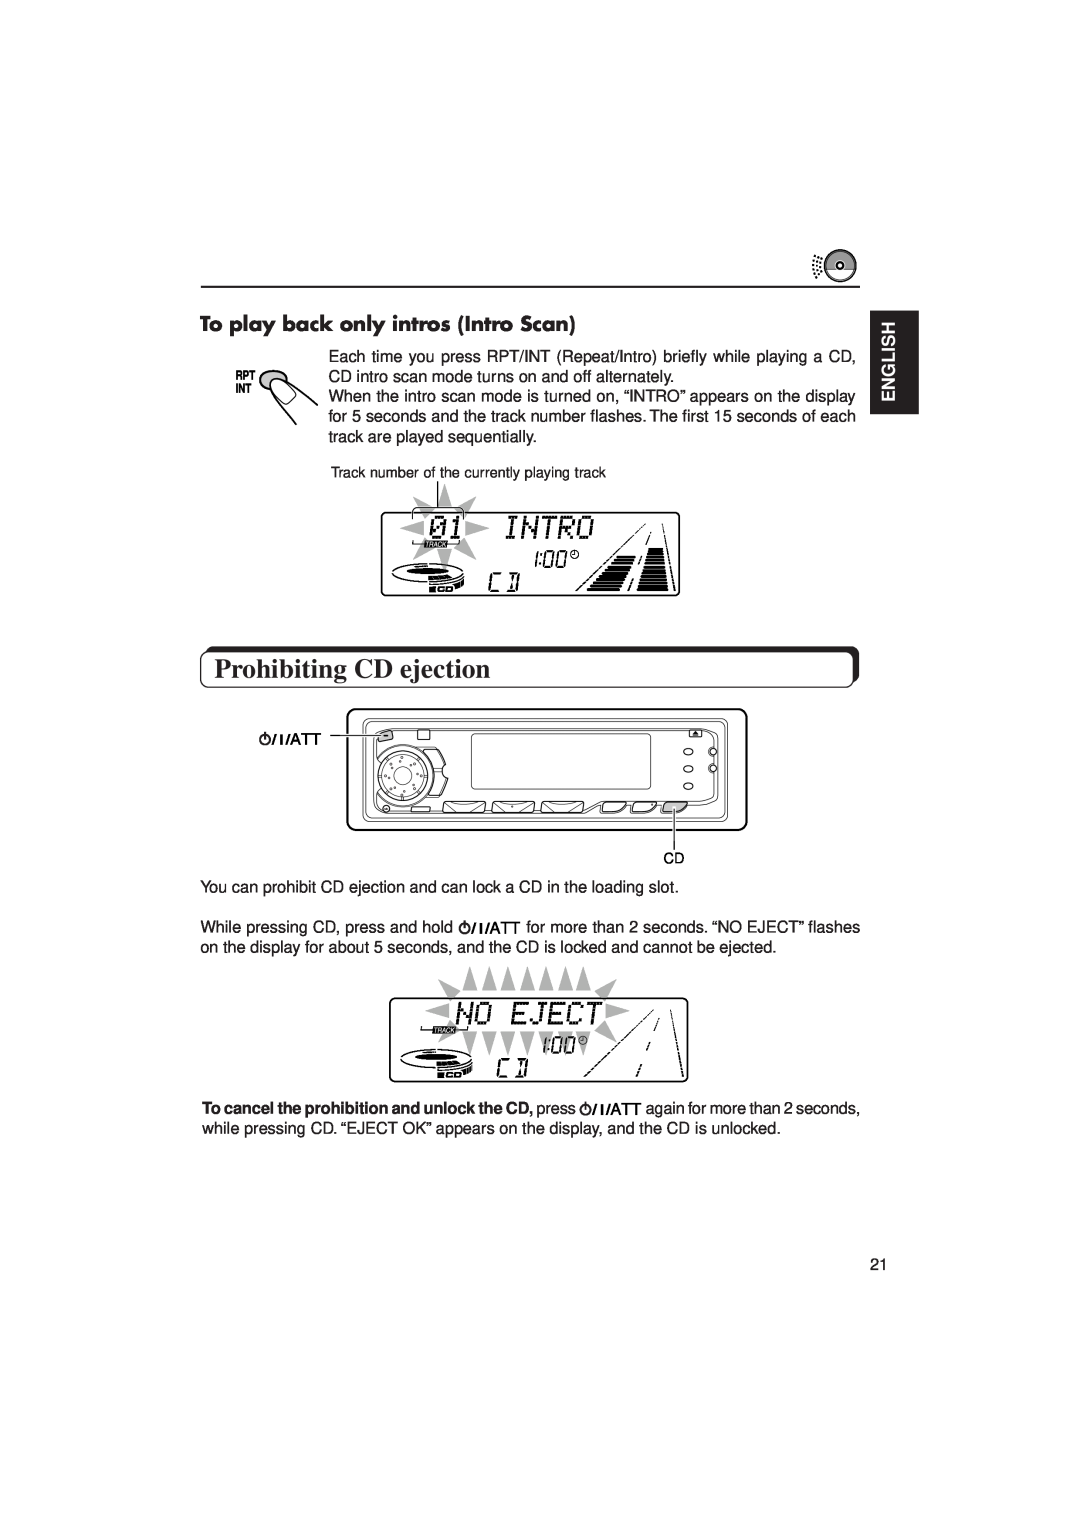 JVC KD-SX1000RJ manual Prohibiting CD ejection, To play back only intros Intro Scan, English 